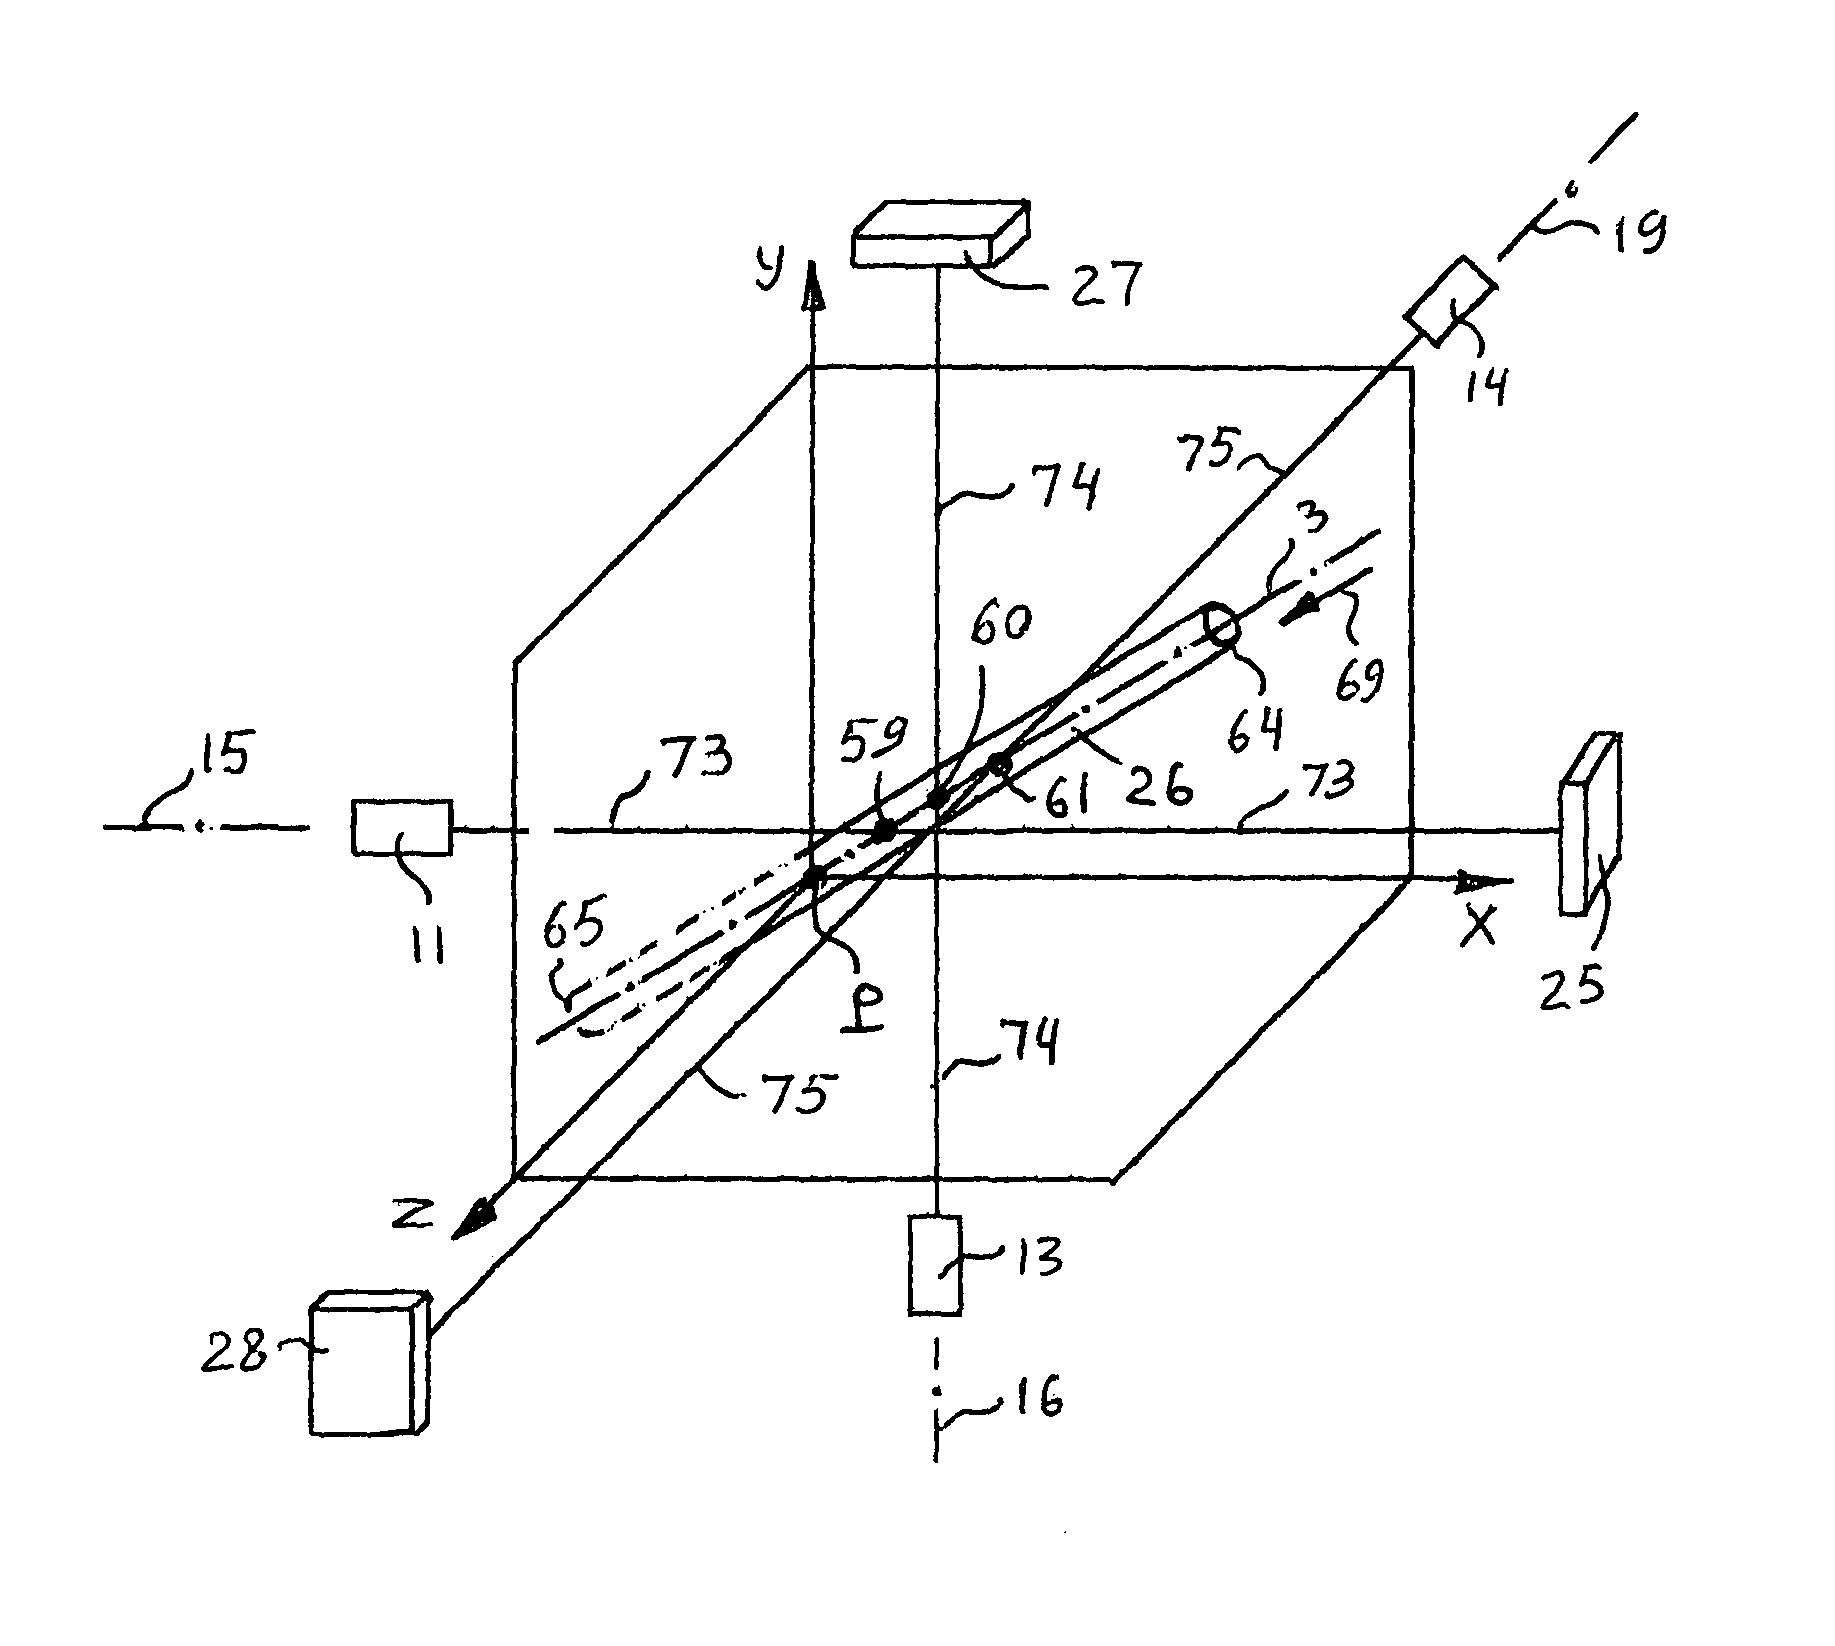 Methods and apparatus for biomedical agent multi-dimension measuring and analysis